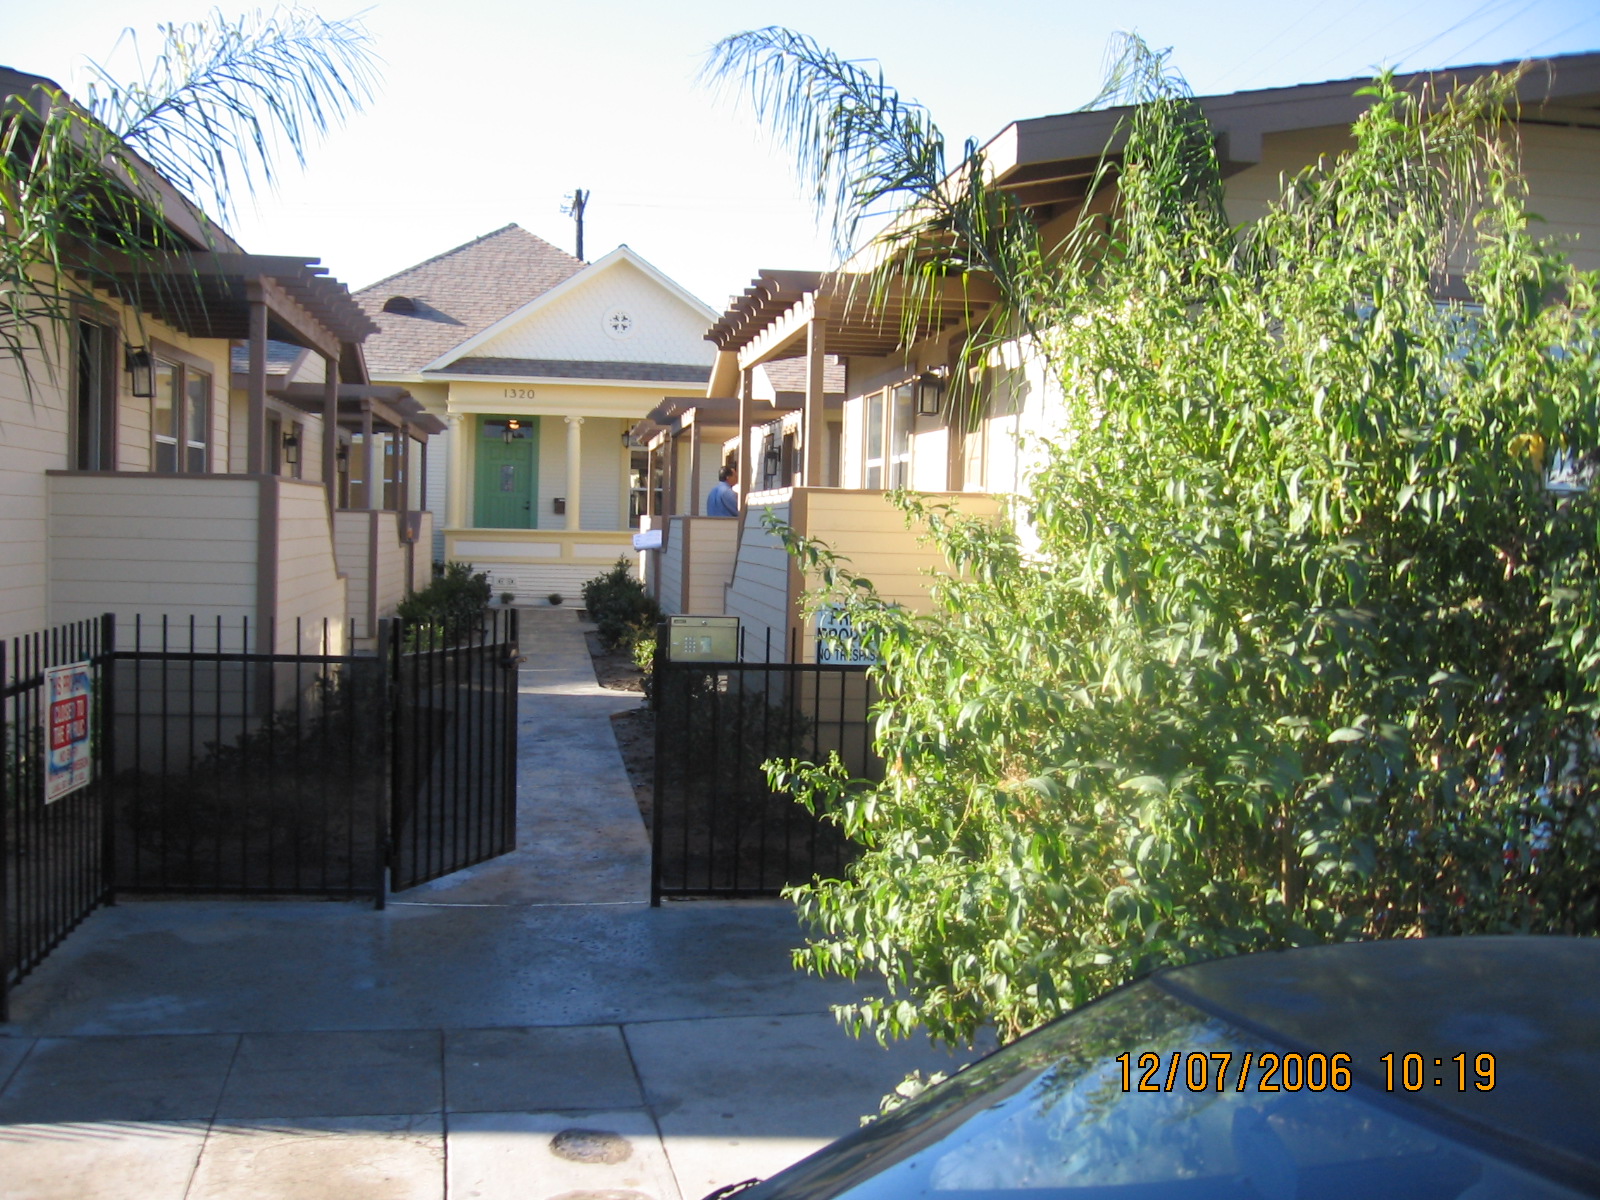 Gated group of one story complexes. Entry is ground level with 3 stairs to access the unit and has a key pad. Small bushes are aligned in the front of each complex. One complex has a triangle-patterned curtain near its front door.